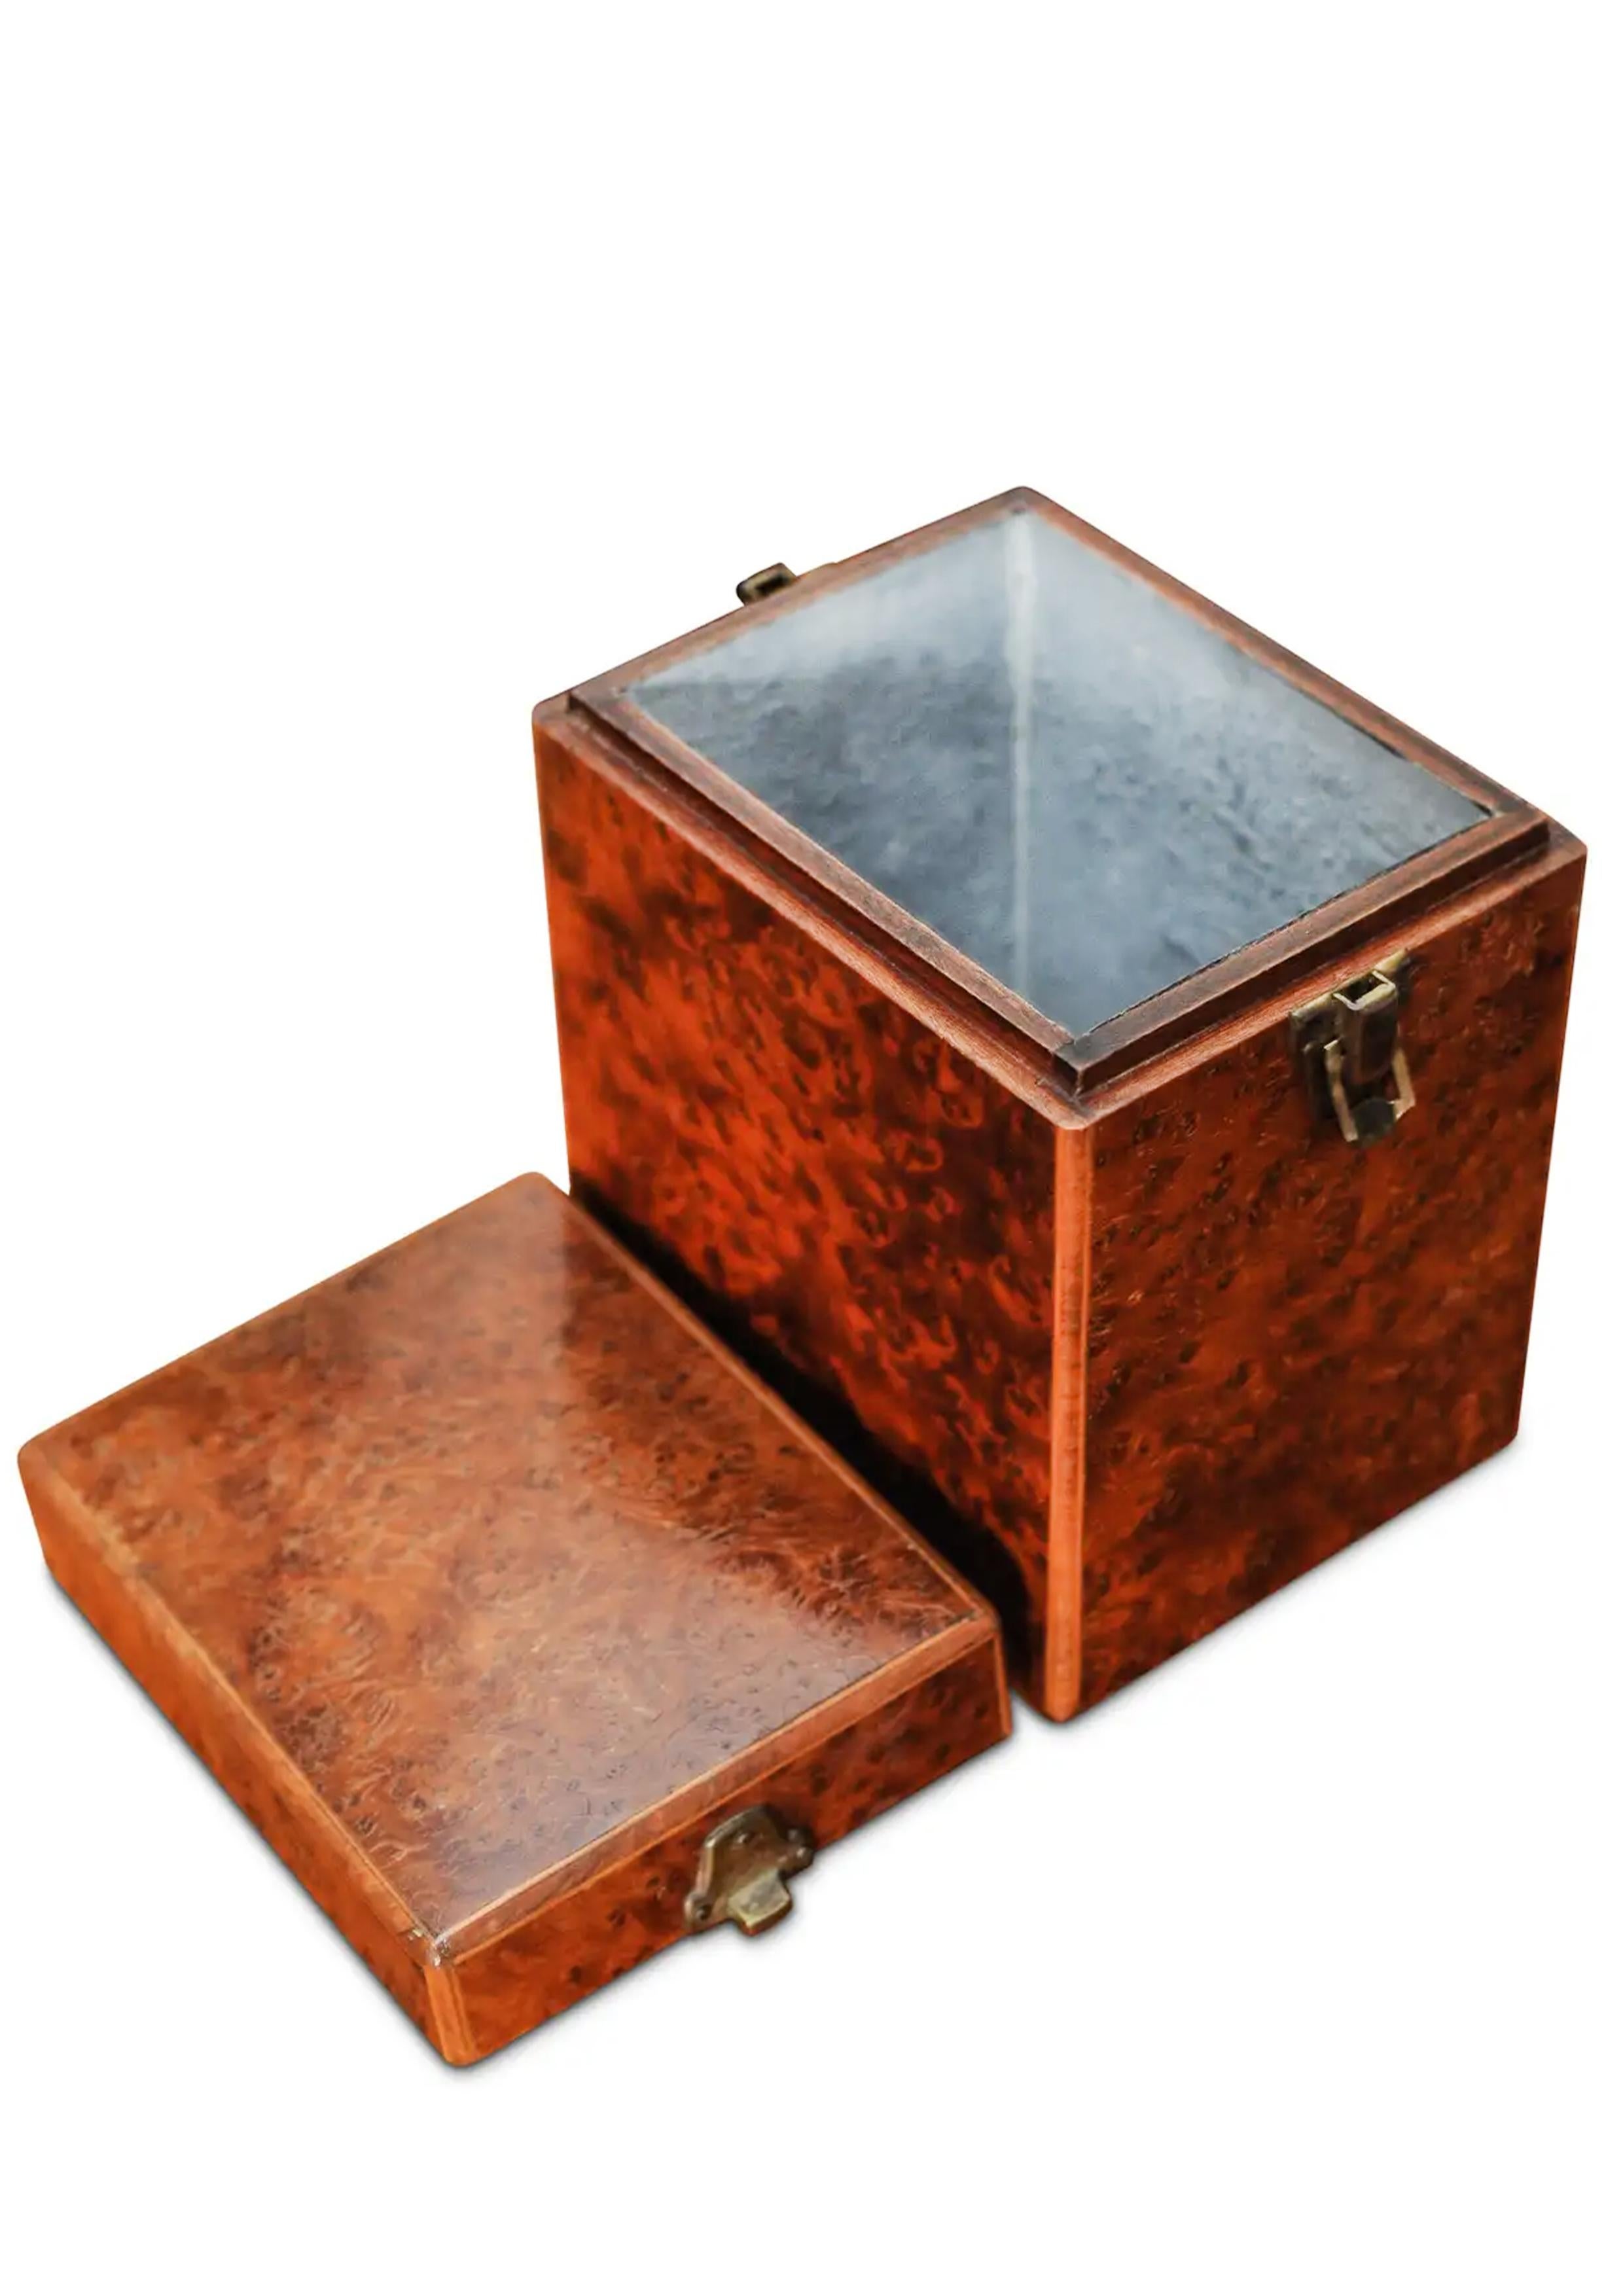 A Handmade Victorian Burr Walnut & Inlay Tea Caddy With Brass Hinges

A tea caddy is a box, jar, canister, or other receptacle used to store tea. When first introduced to Europe from Asia, tea was extremely expensive, and kept under lock and key.